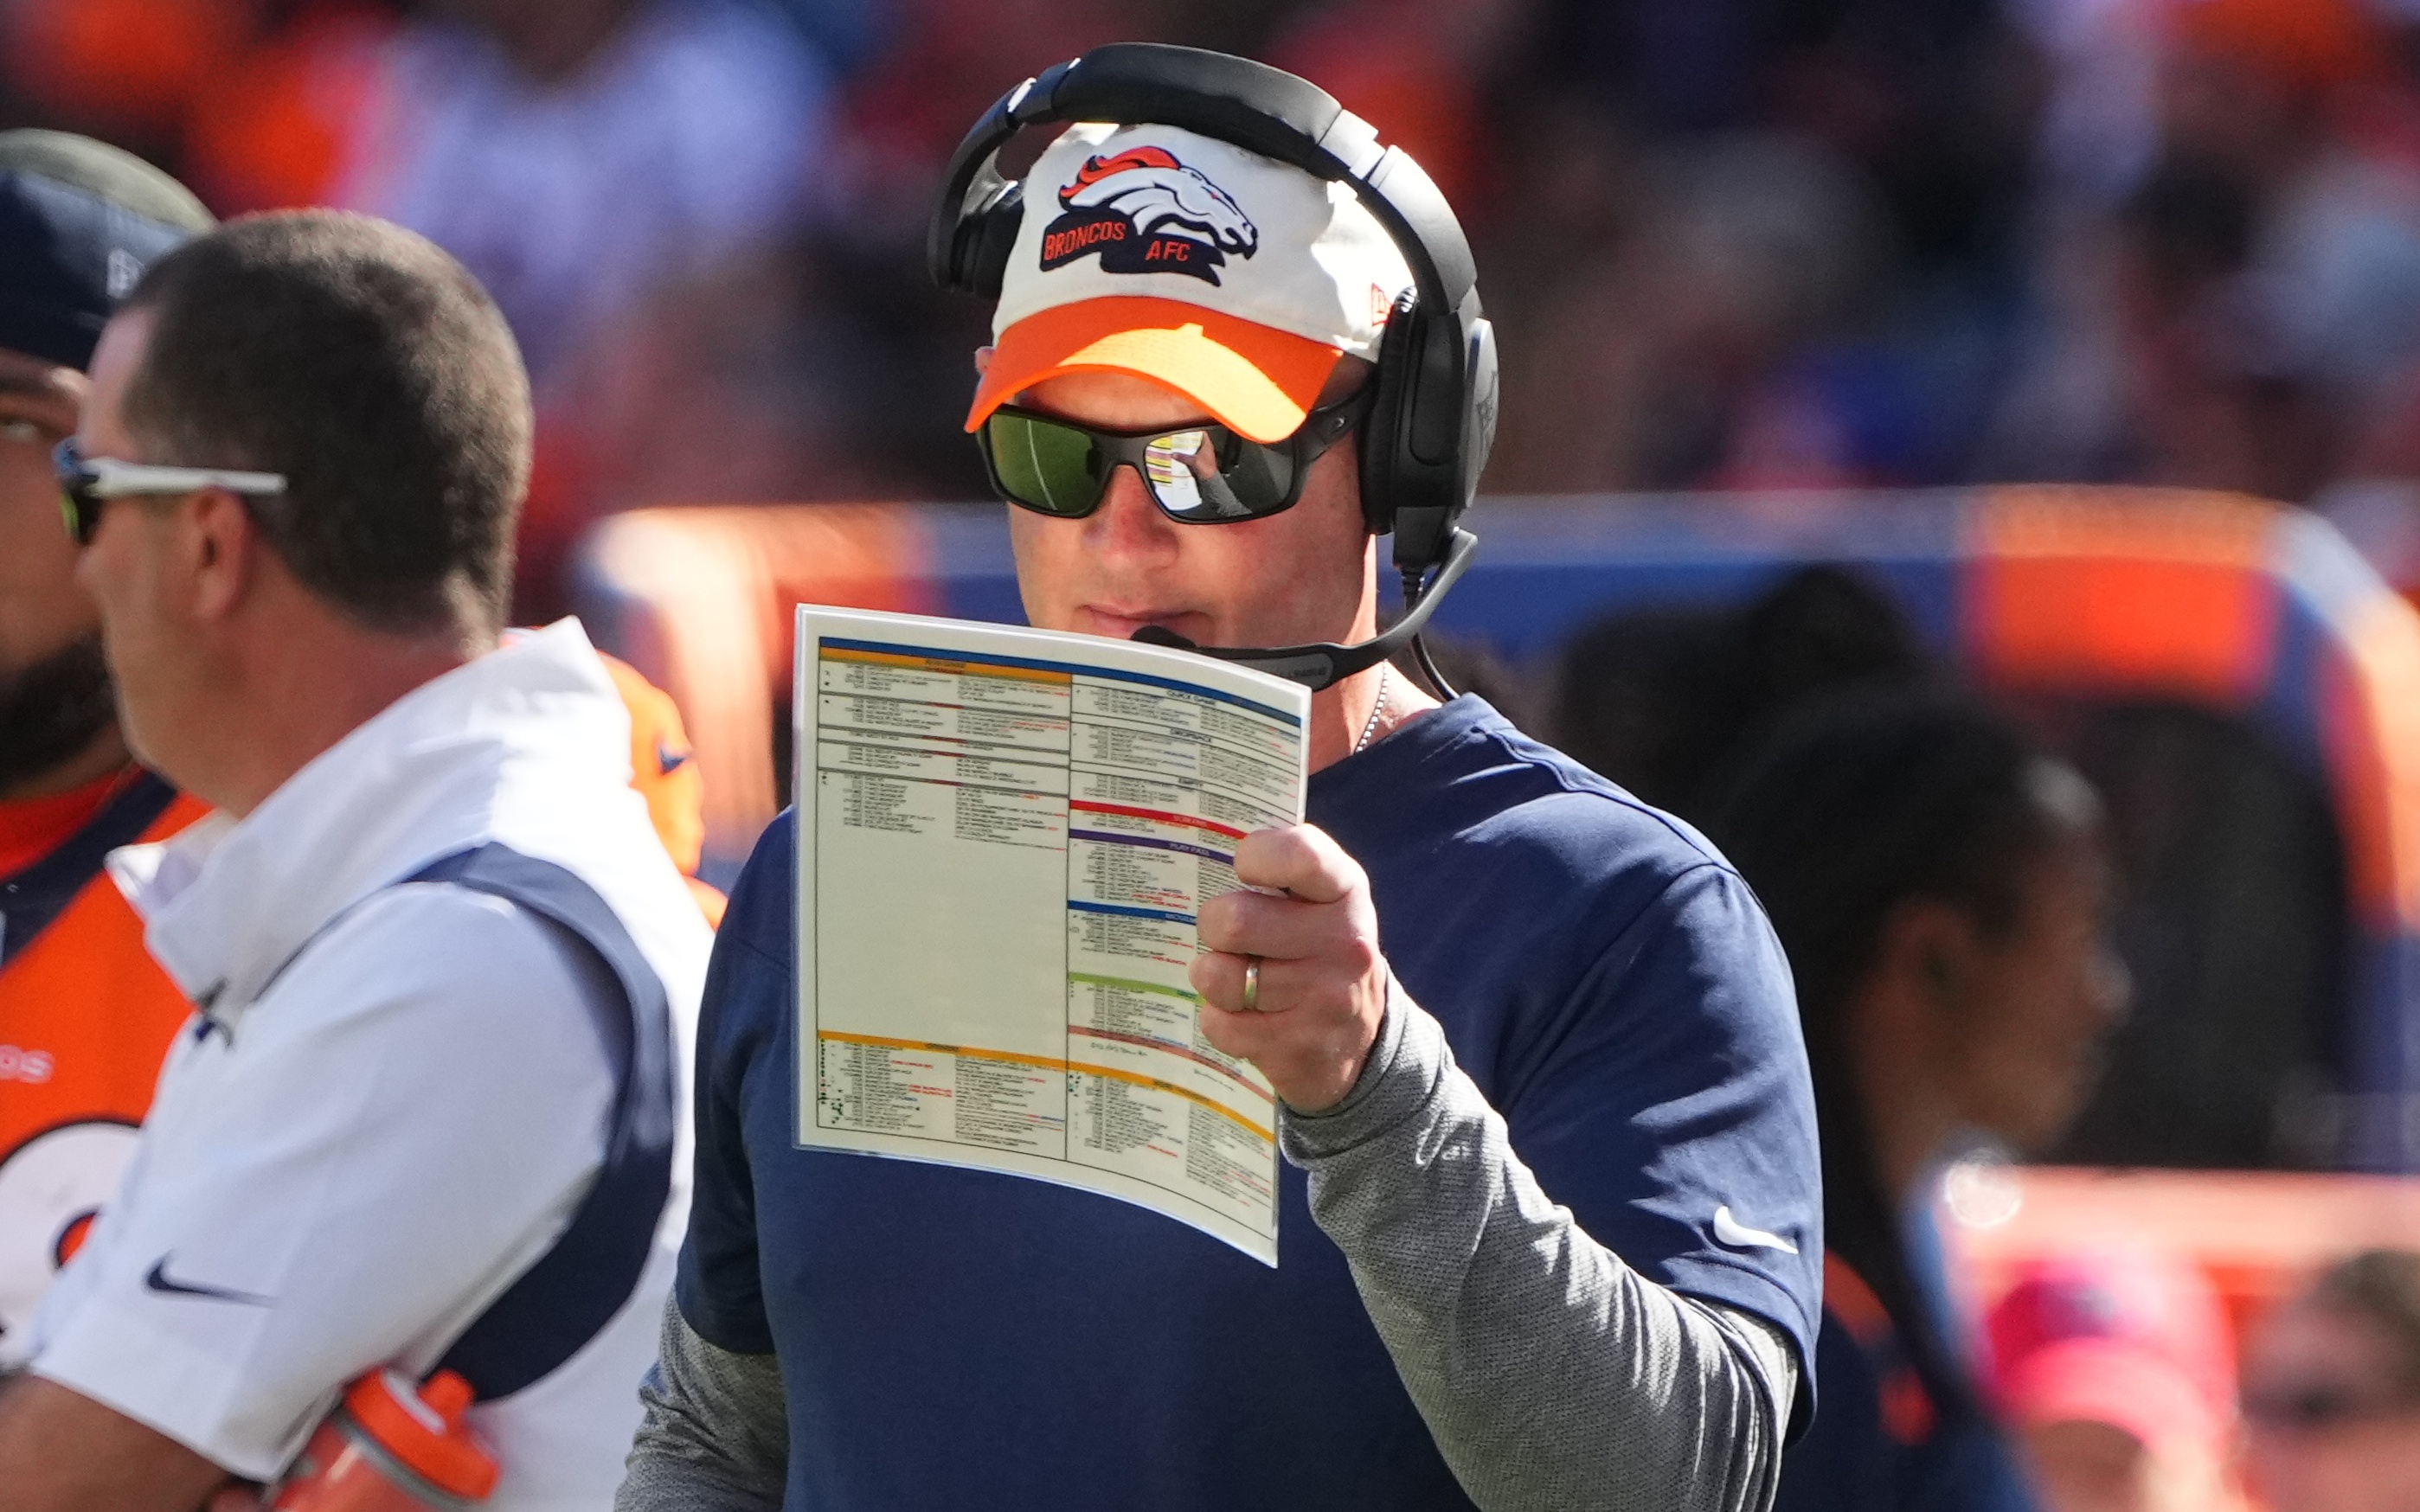 Nathaniel Hackett calling plays in the win over Houston on Sunday, Sept. 18 2022. Credit: Ron Chenoy, USA TODAY Sports.